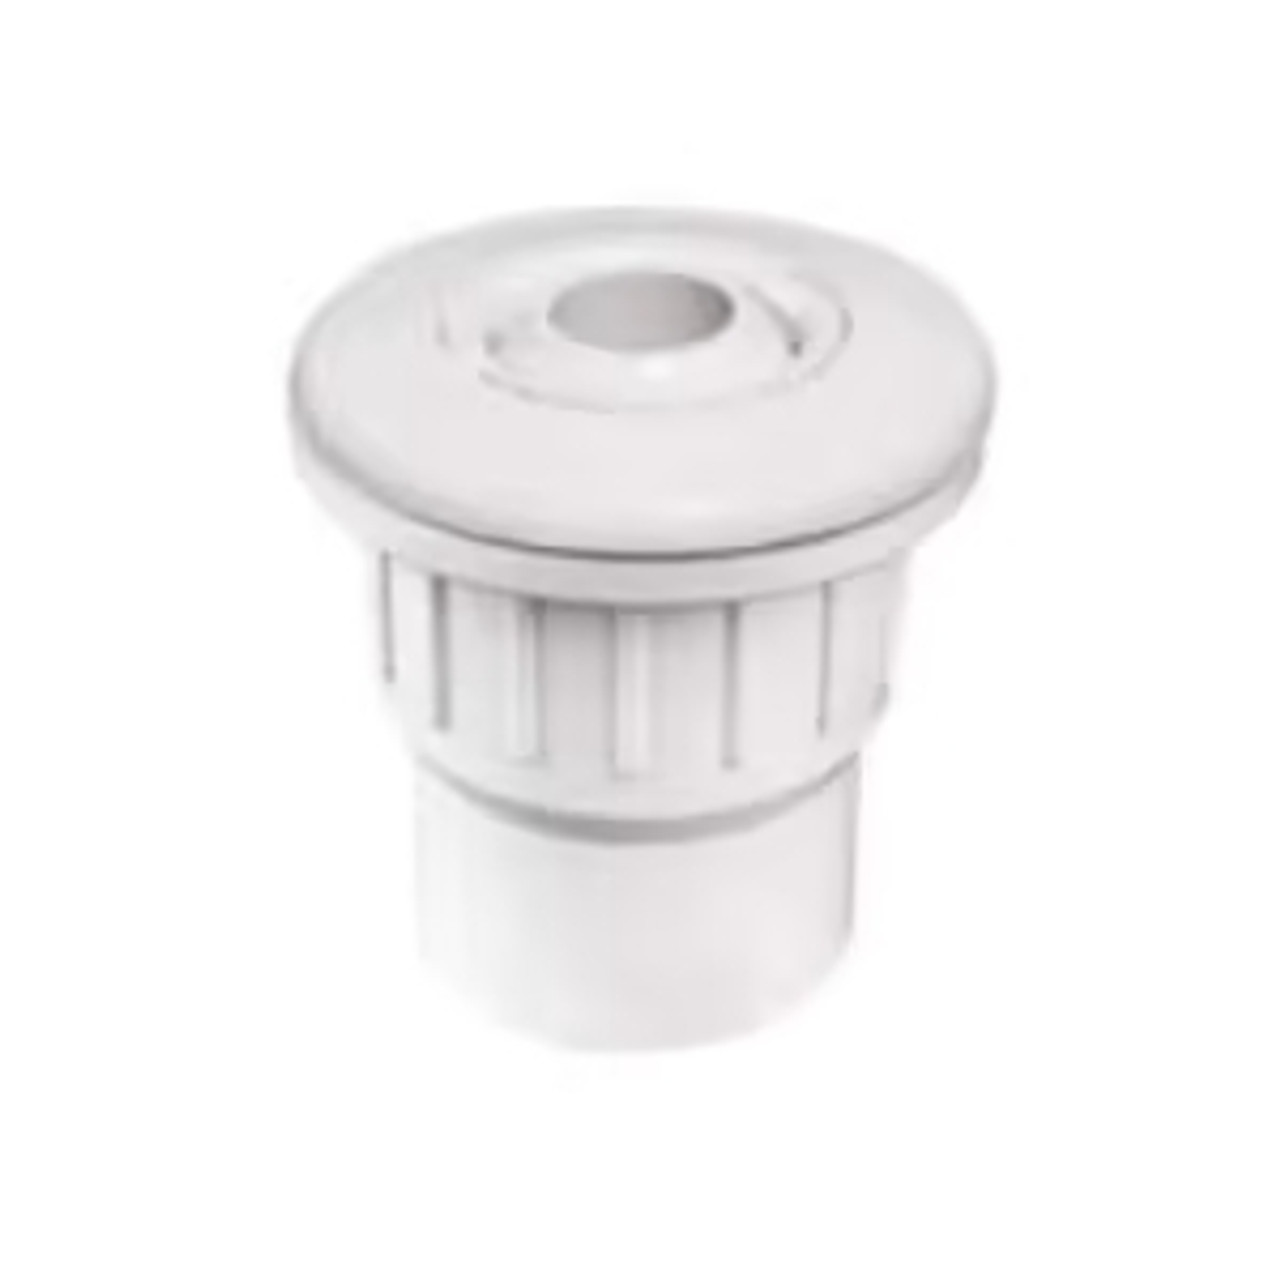 CMP, FG, Pool, Wall, Fitting, W/, Nut, 2", 25523-601-000, CTM-25-0123, Skimmer, Parts, 849640027127
